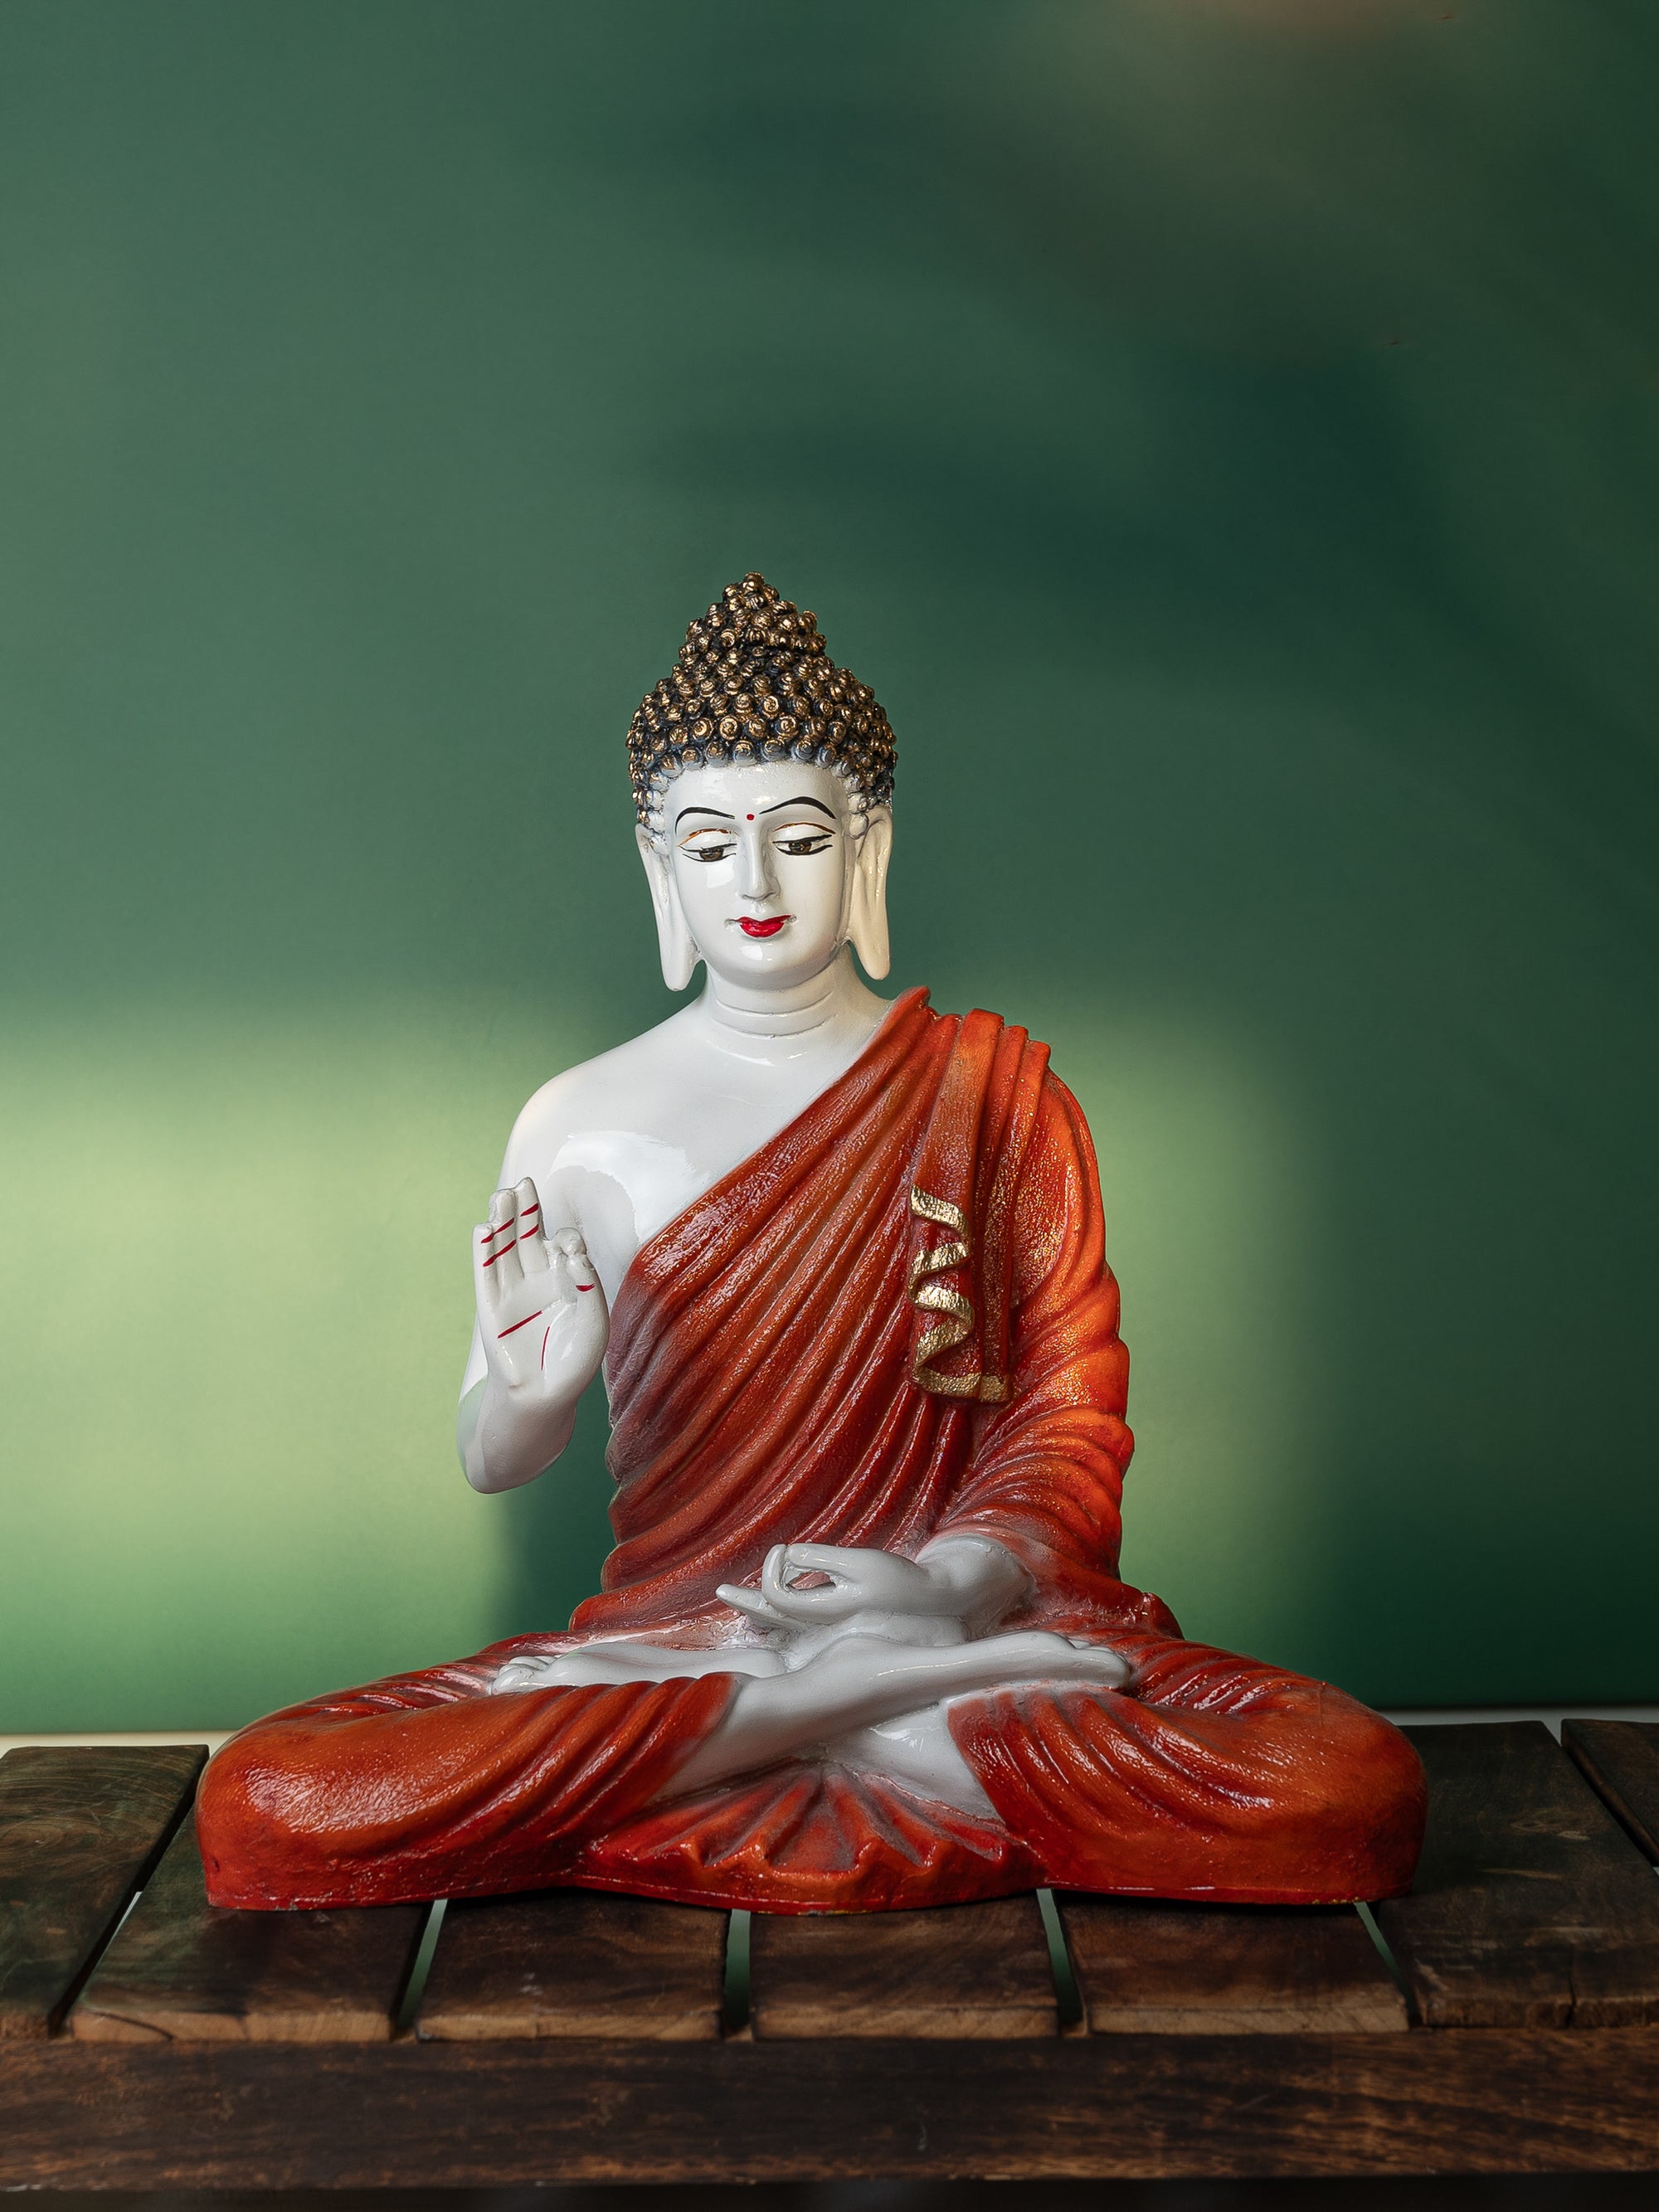 Resin Crafted White and Orange Meditating Buddha Statue - 14 inches